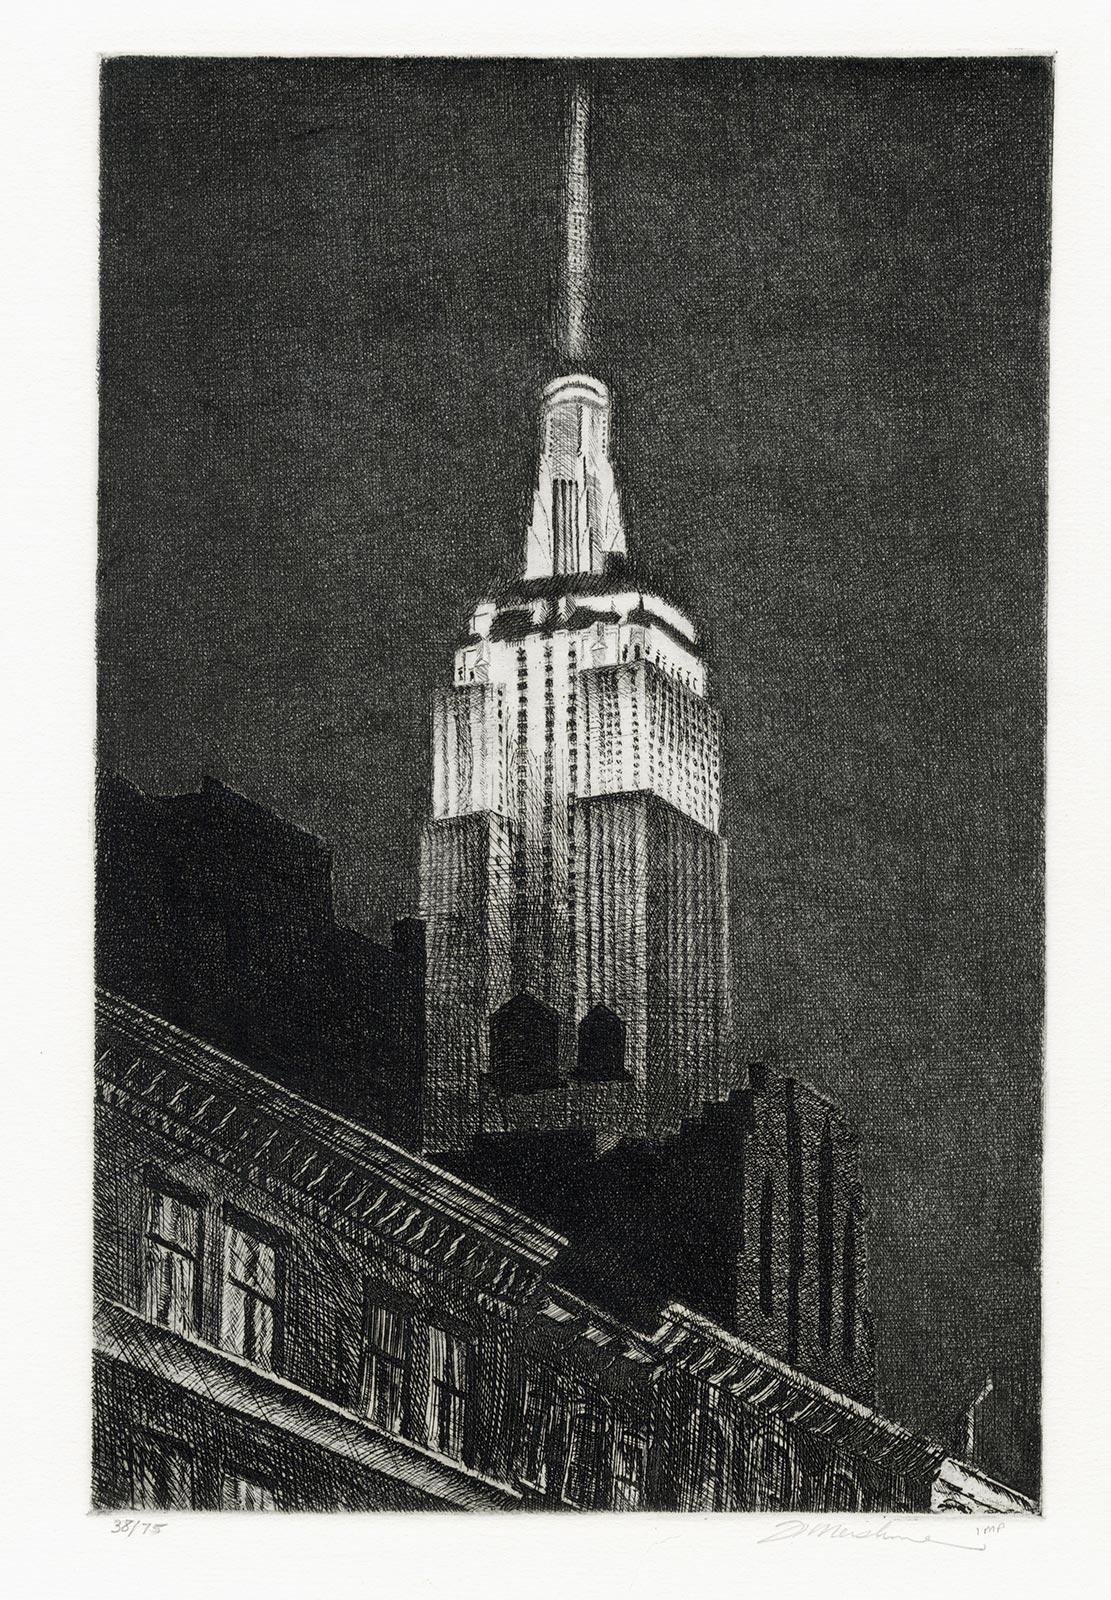 In Mershimer's first published image, he captured the now obstructed view of the Empire State Building from 6th Ave at 39th Street  It is #1 in the catalogue raisonne by Retif & Salzer.  Mershimer sees 